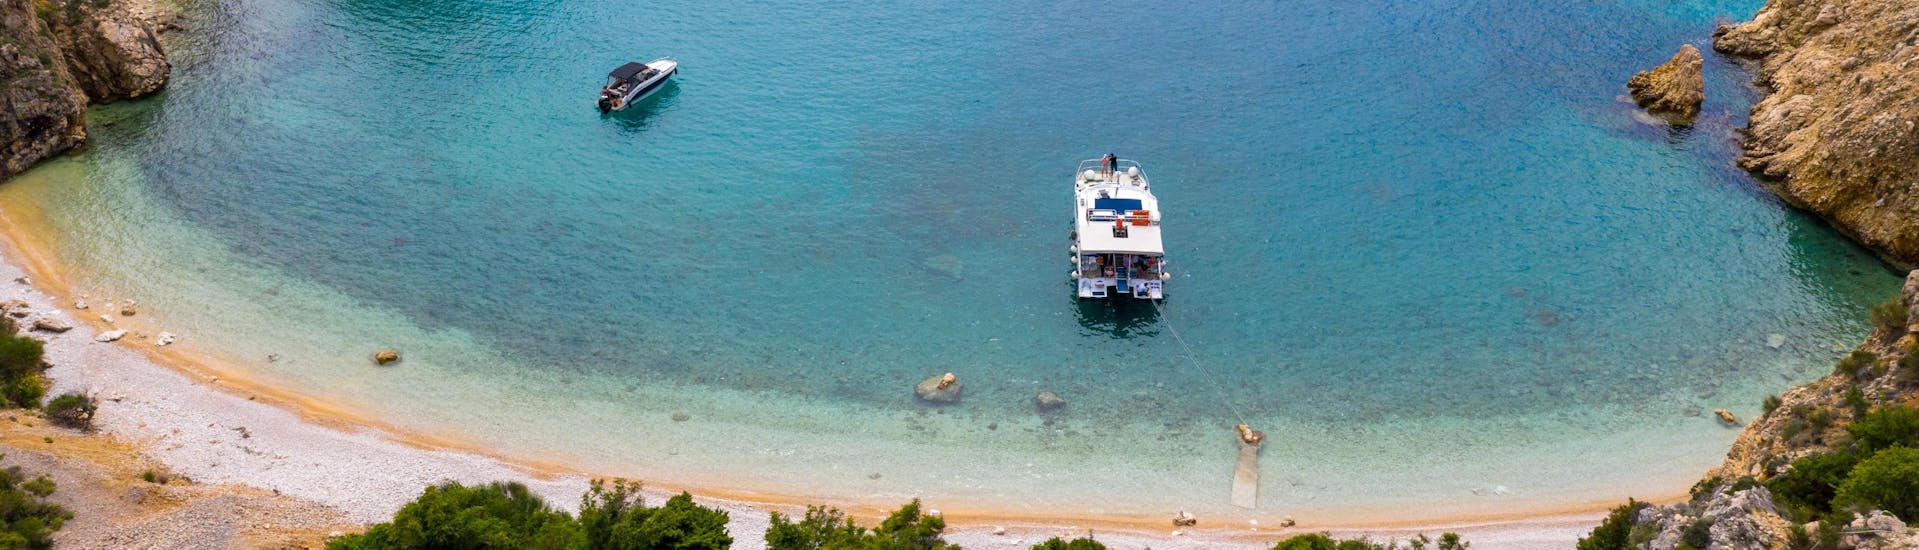 Picture of the boat from Plavnik Excursions Punat anchored in Fox Bay for a swimming stop.